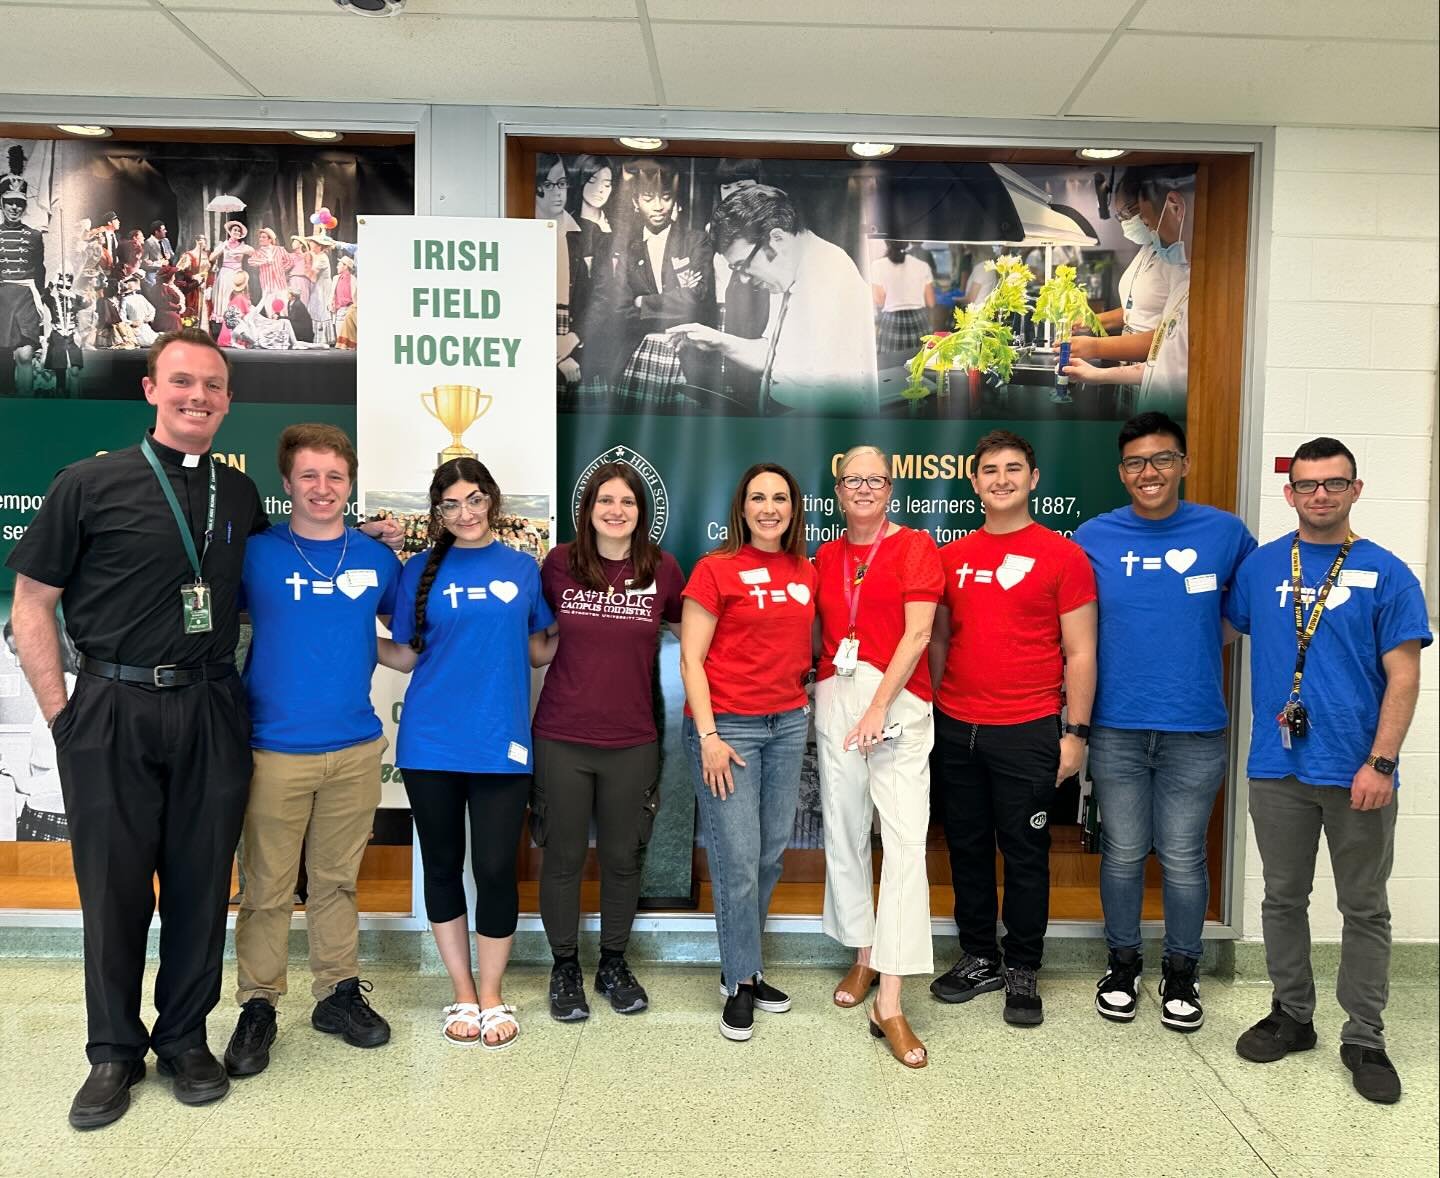 Another great day speaking at another @camdendiocese Catholic High School! Today Rowan Catholic Campus Ministry &amp; @stocktonnewmanclub spoke at @camdencatholic about our Newman Houses. Thank you to Mrs. LaRosa, Fr. Robbins and the teachers who wel